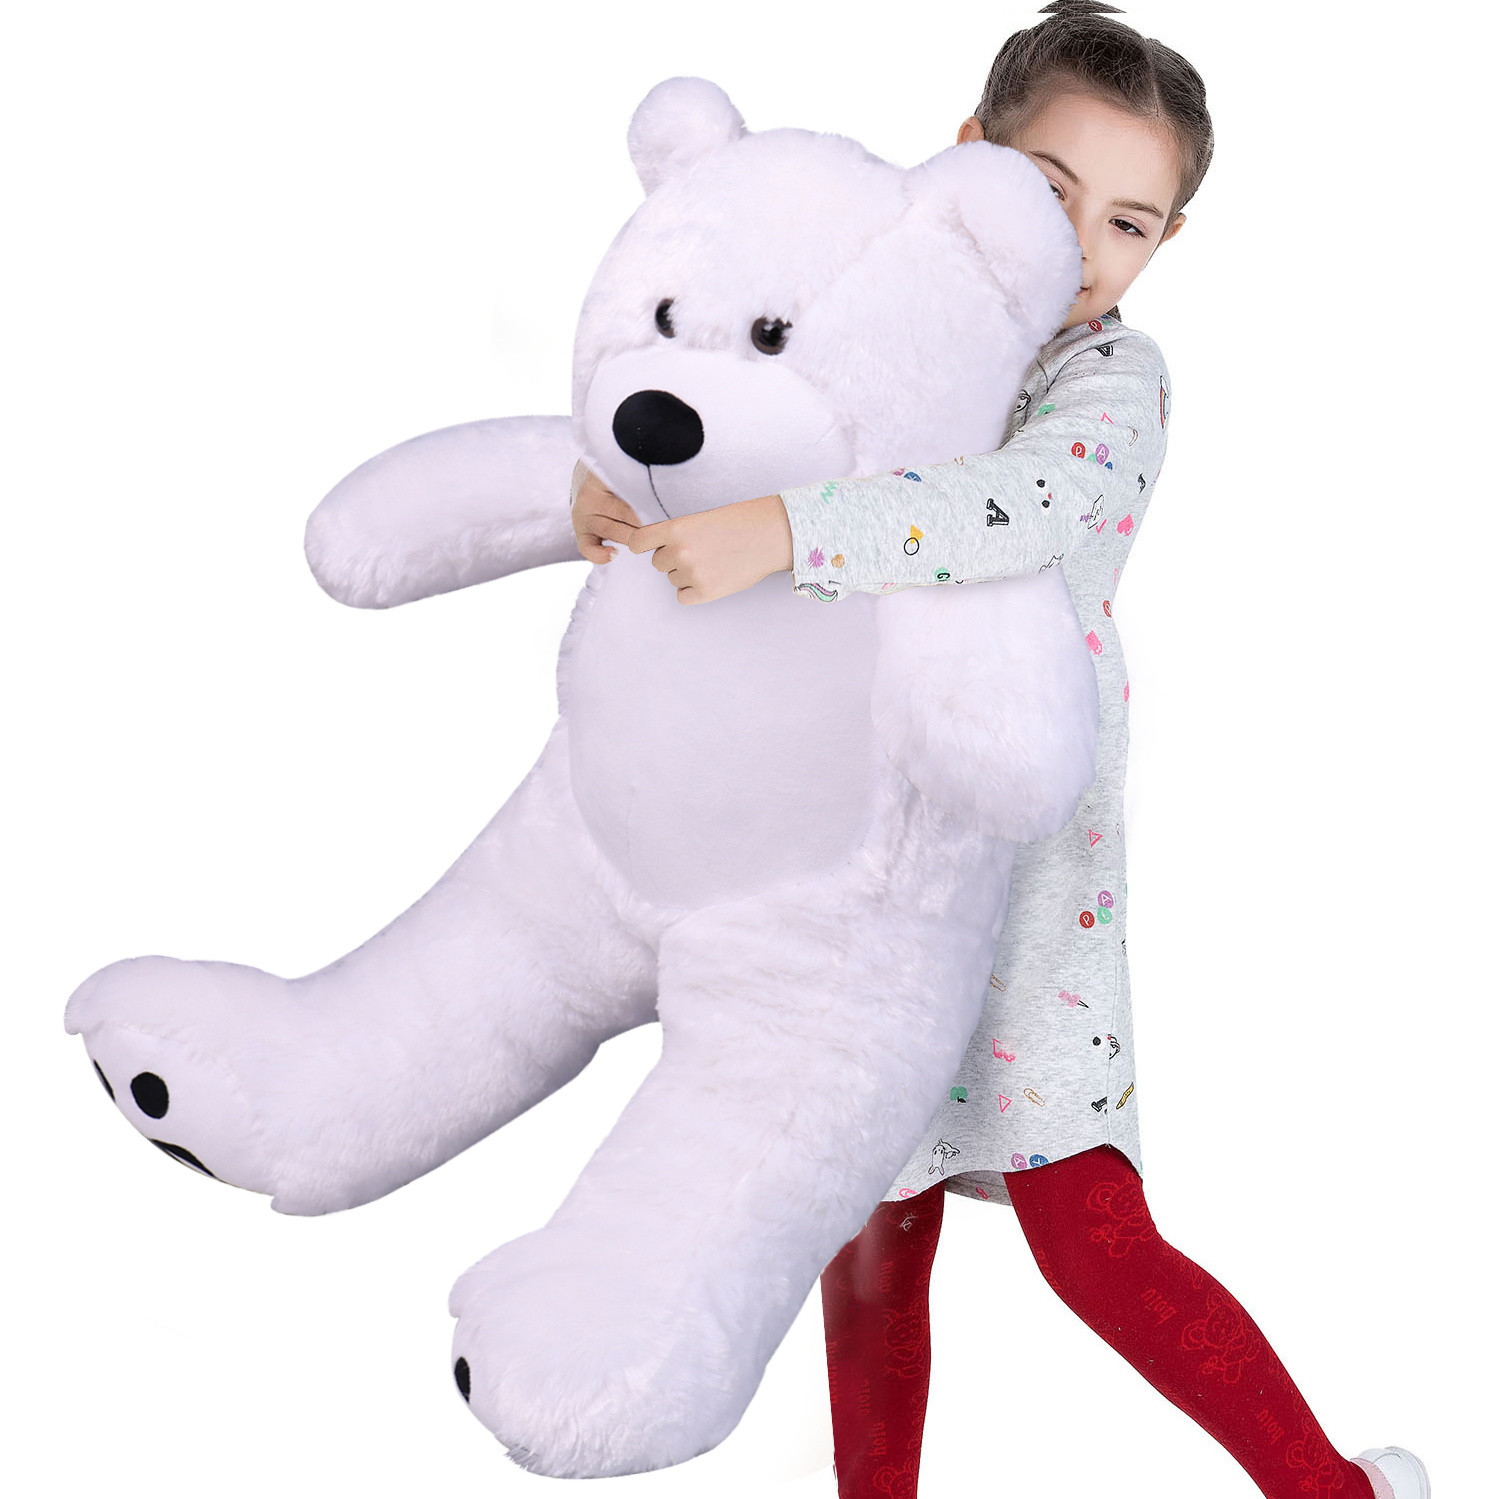 WOWMAX 3 Foot Giant Teddy Bear Daney Cuddly Stuffed Plush Animals Teddy Bear Toy Doll for Birthday Christmas White 36 Inches - image 4 of 5